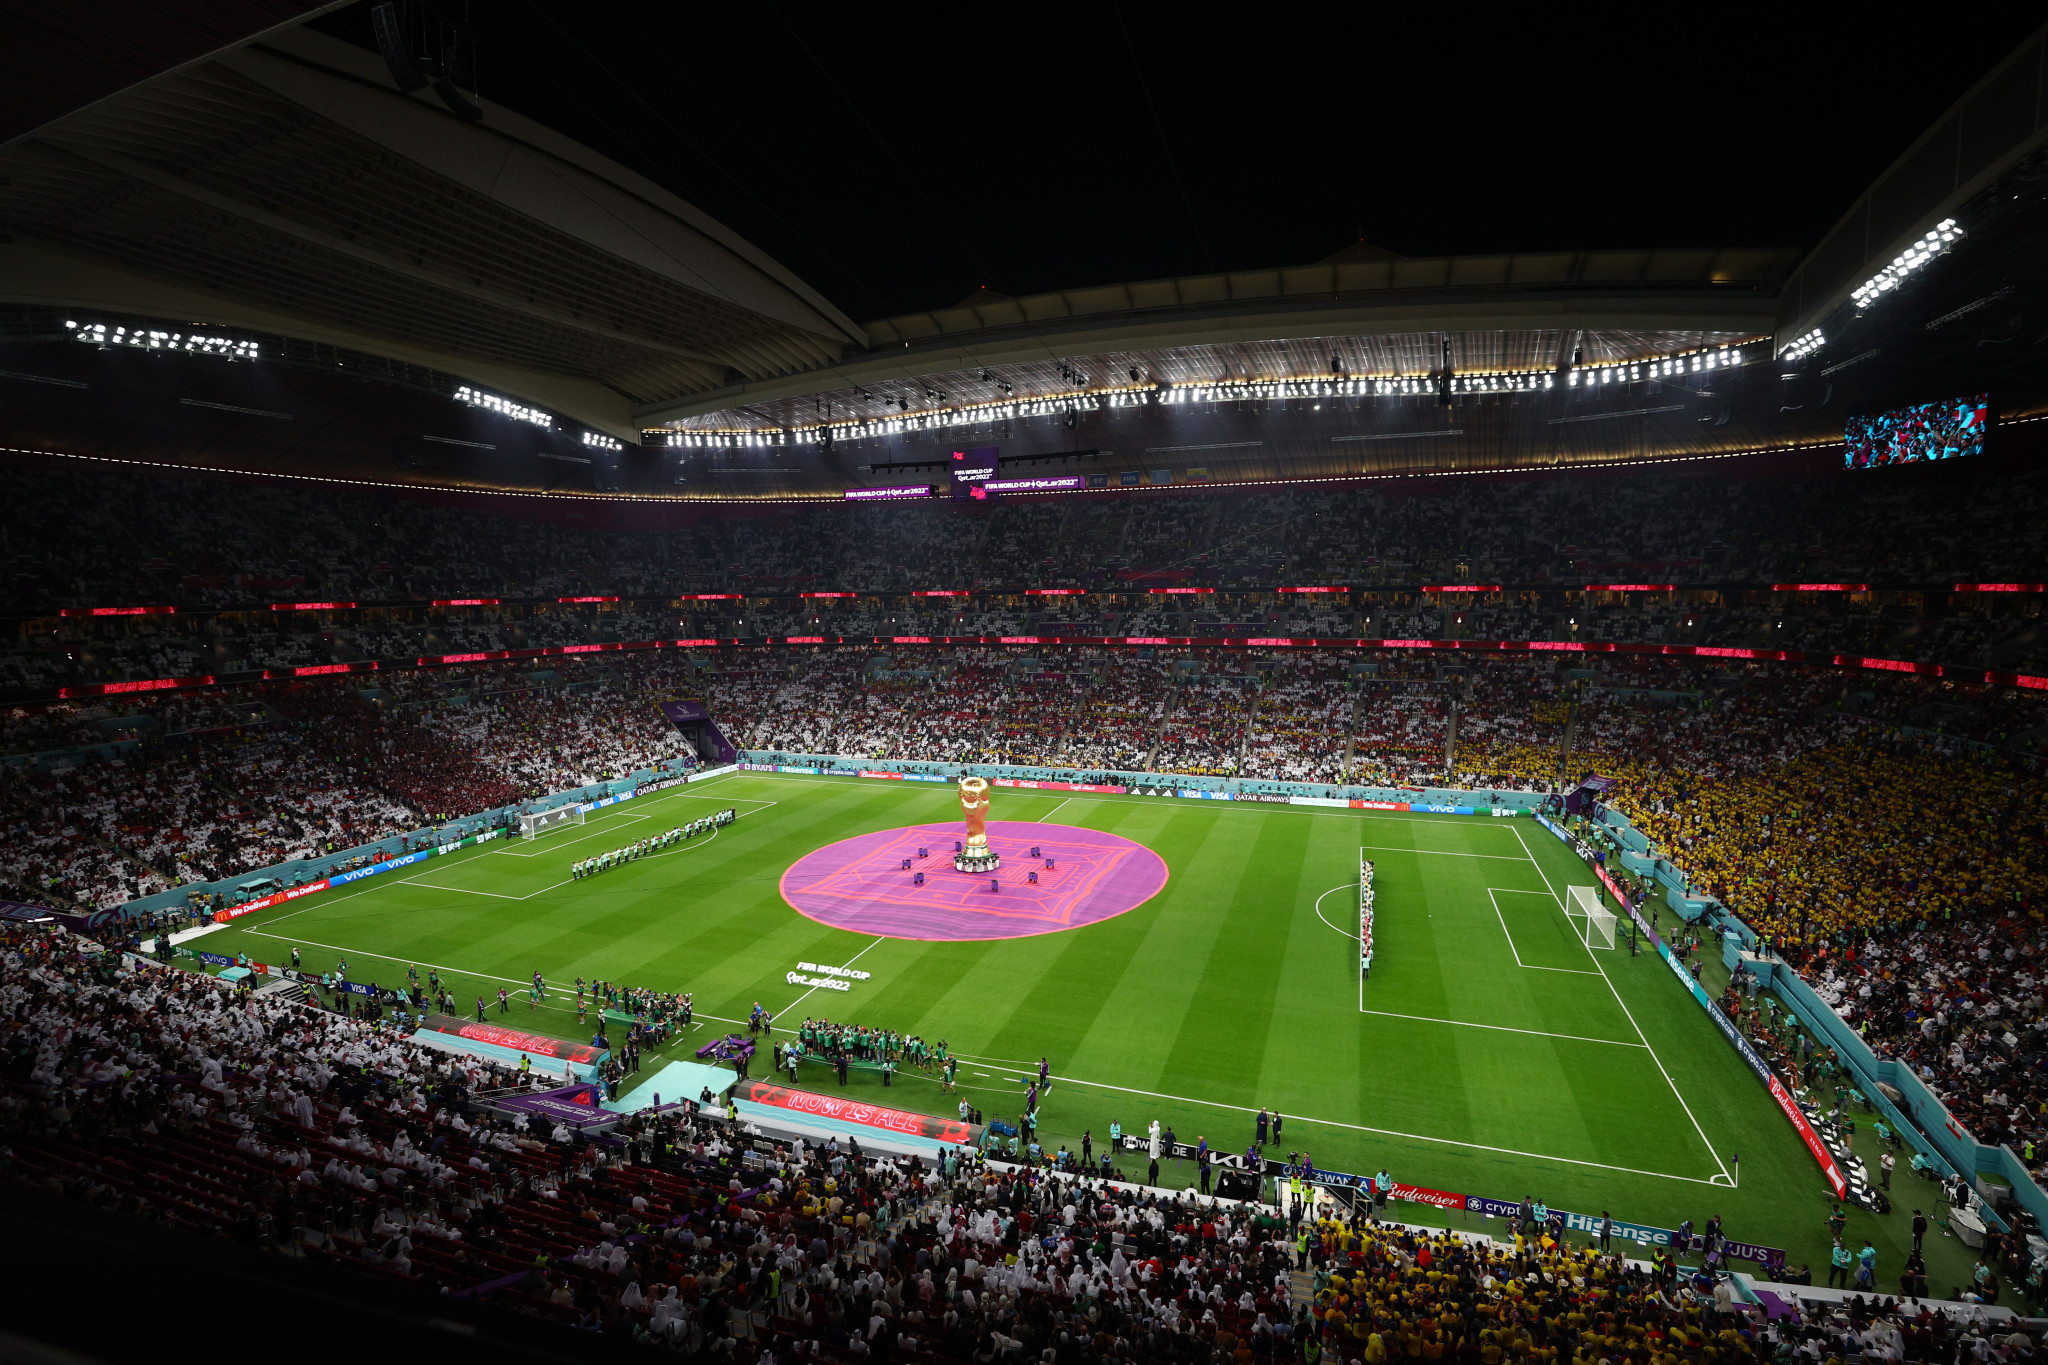 In the space of one cycle, FIFA is aiming to move from a situation where ticketing/hospitality generates around 12.5 per cent of its revenues, as over the four years culminating with Qatar 2022, to one where it is responsible for more than 28 per cent of the total ©Getty Images